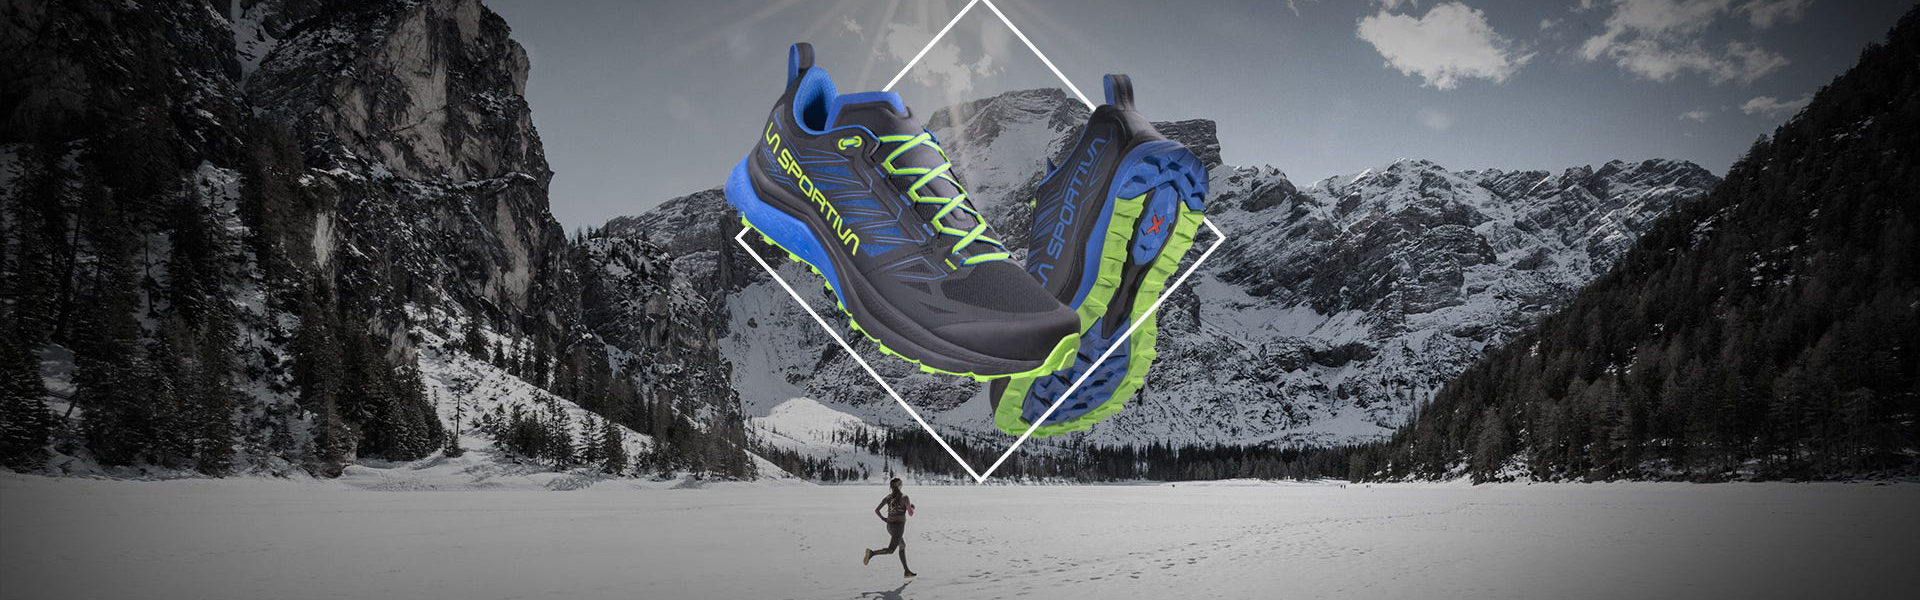 A history of Alpinism,<br>Passion, Innovation<br><span style="color:#ffffff;">La Sportiva</span>